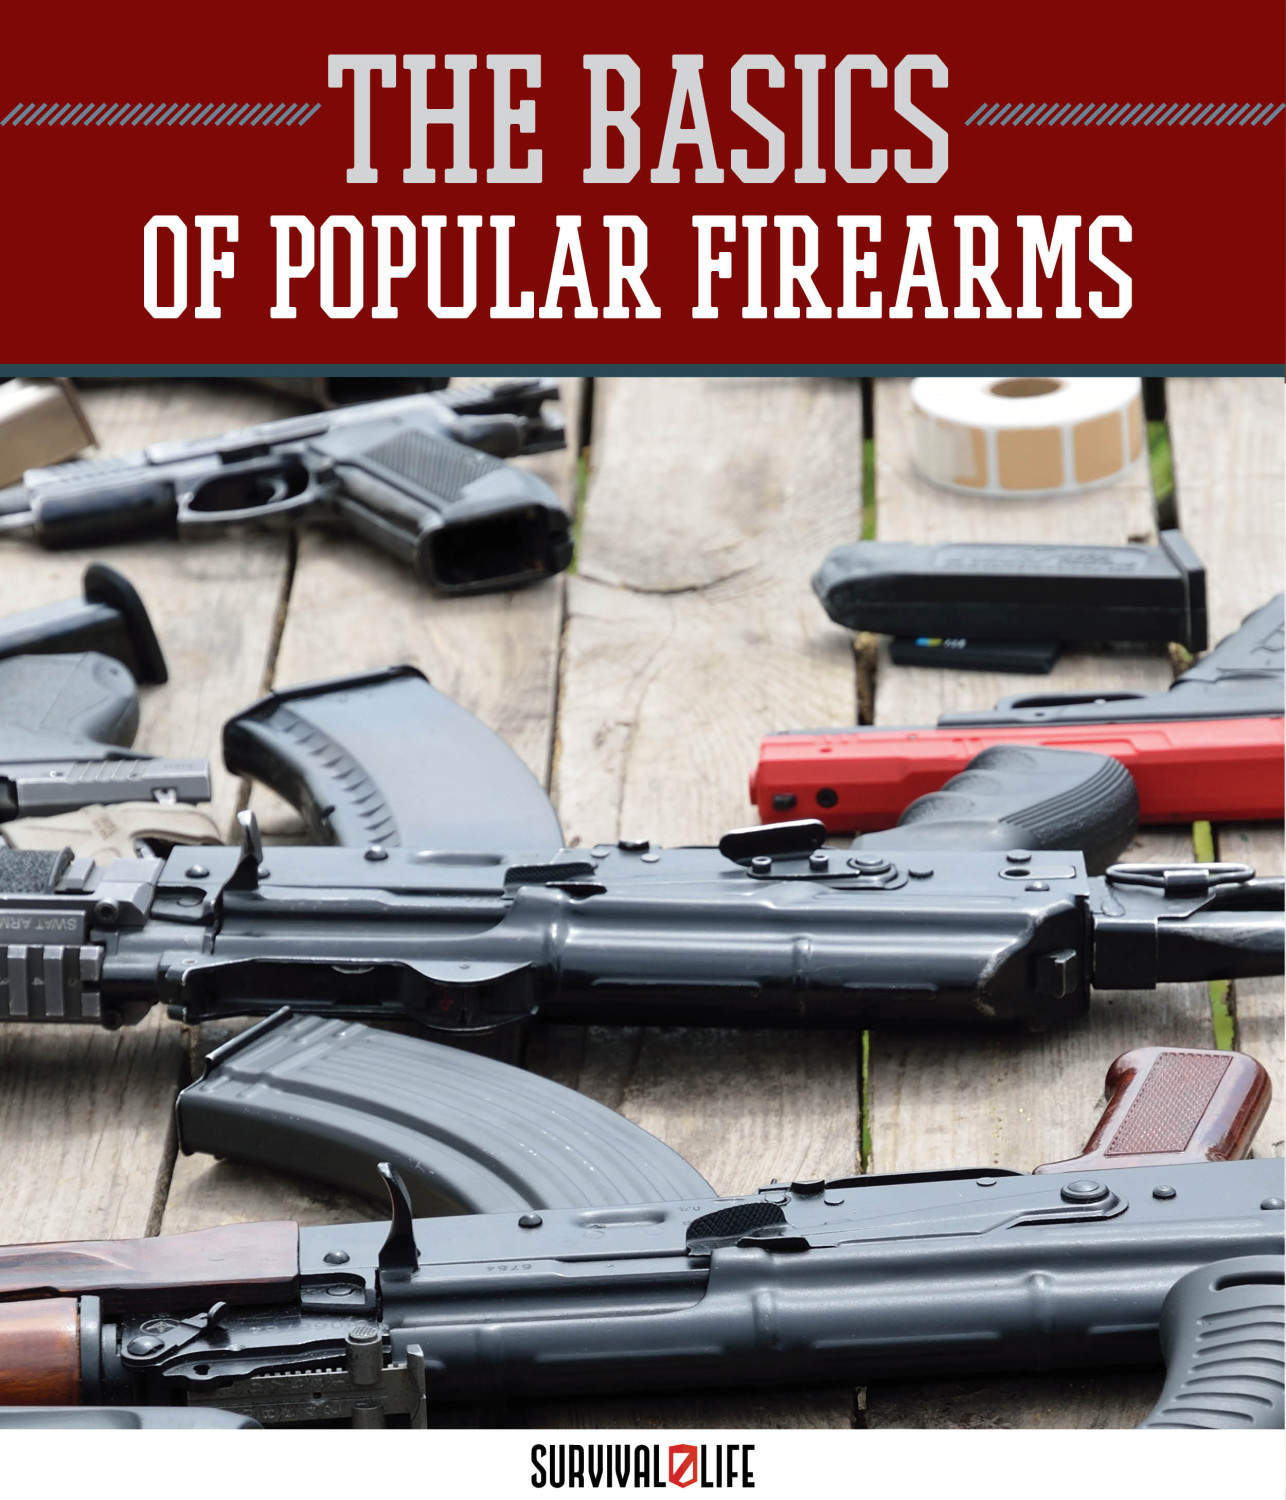 Intro to Firearms by Survival Life at http://survivallife.staging.wpengine.com/2015/04/27/intro-to-firearms/